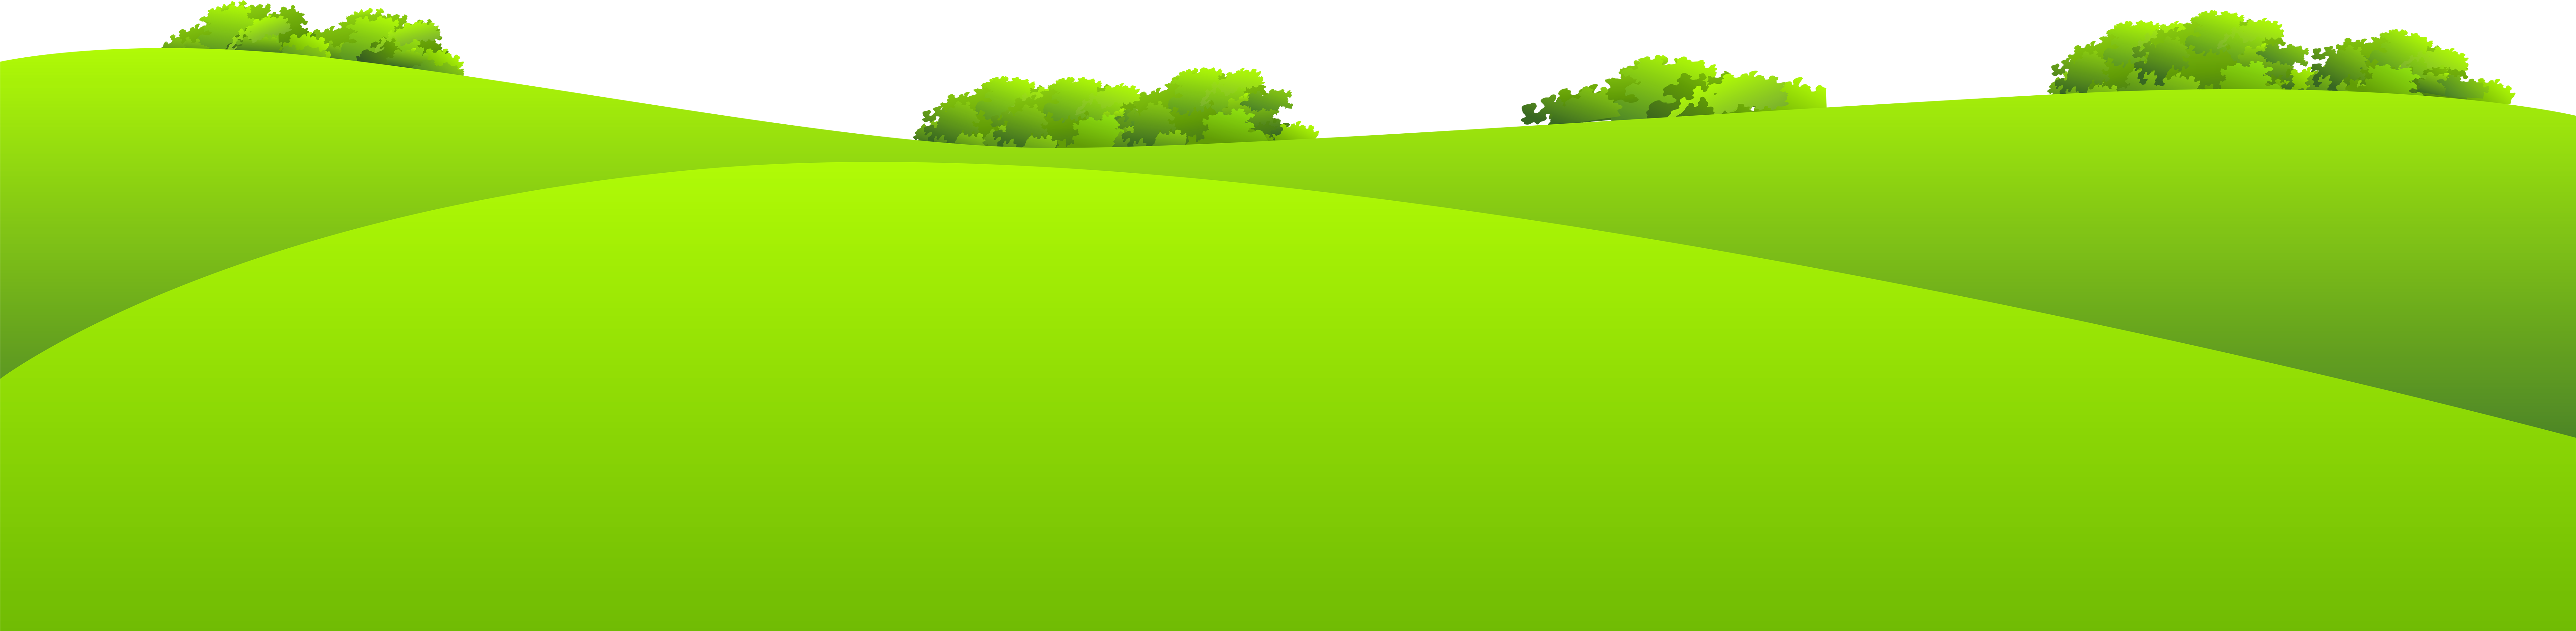 Meadow Greenscape Free HD Image PNG Image